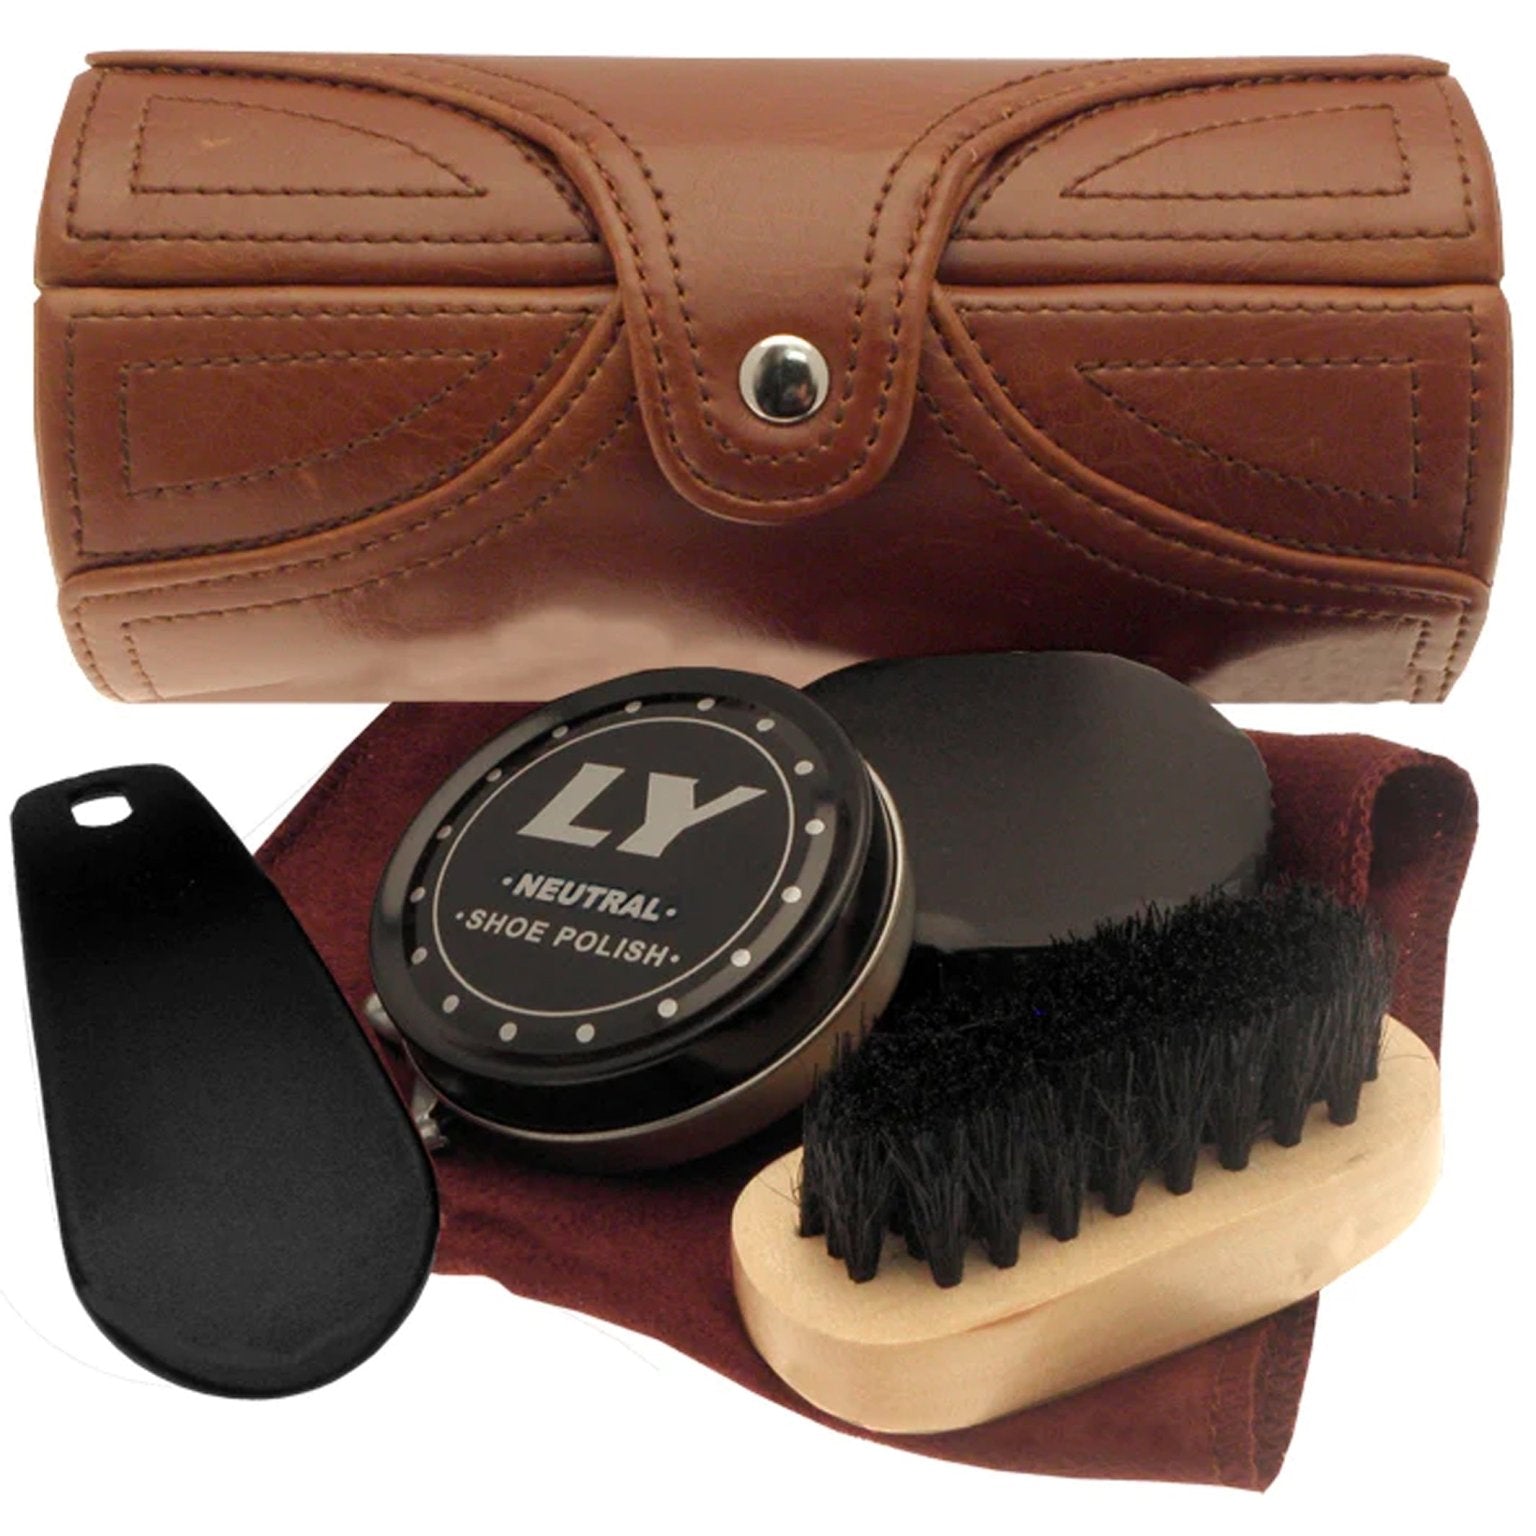 The British Bag Company British Bag Company - 5 Piece Barrel Shoe cleaning and care Kit Shoe & Clothing Care